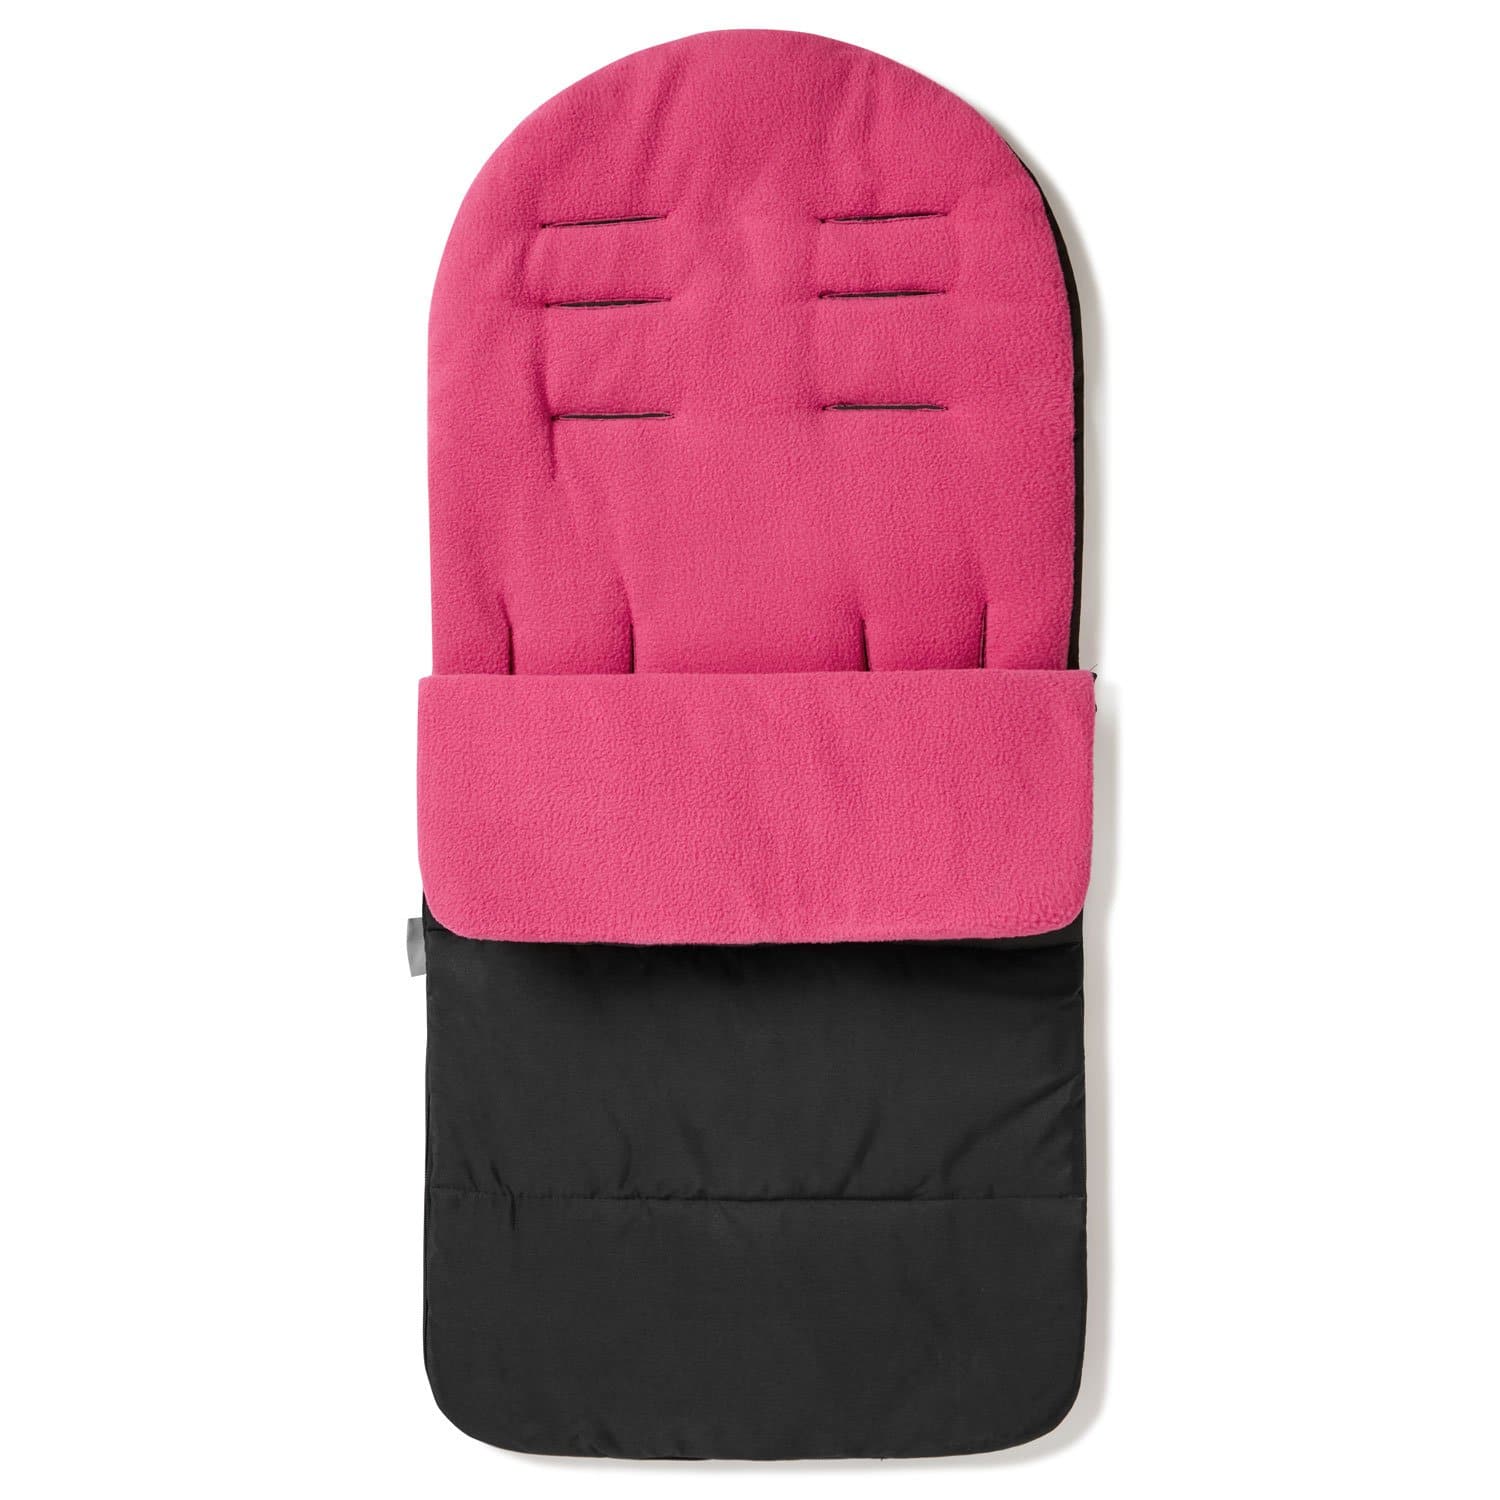 Premium Footmuff / Cosy Toes Compatible with Esprit - Pink Rose / Fits All Models | For Your Little One